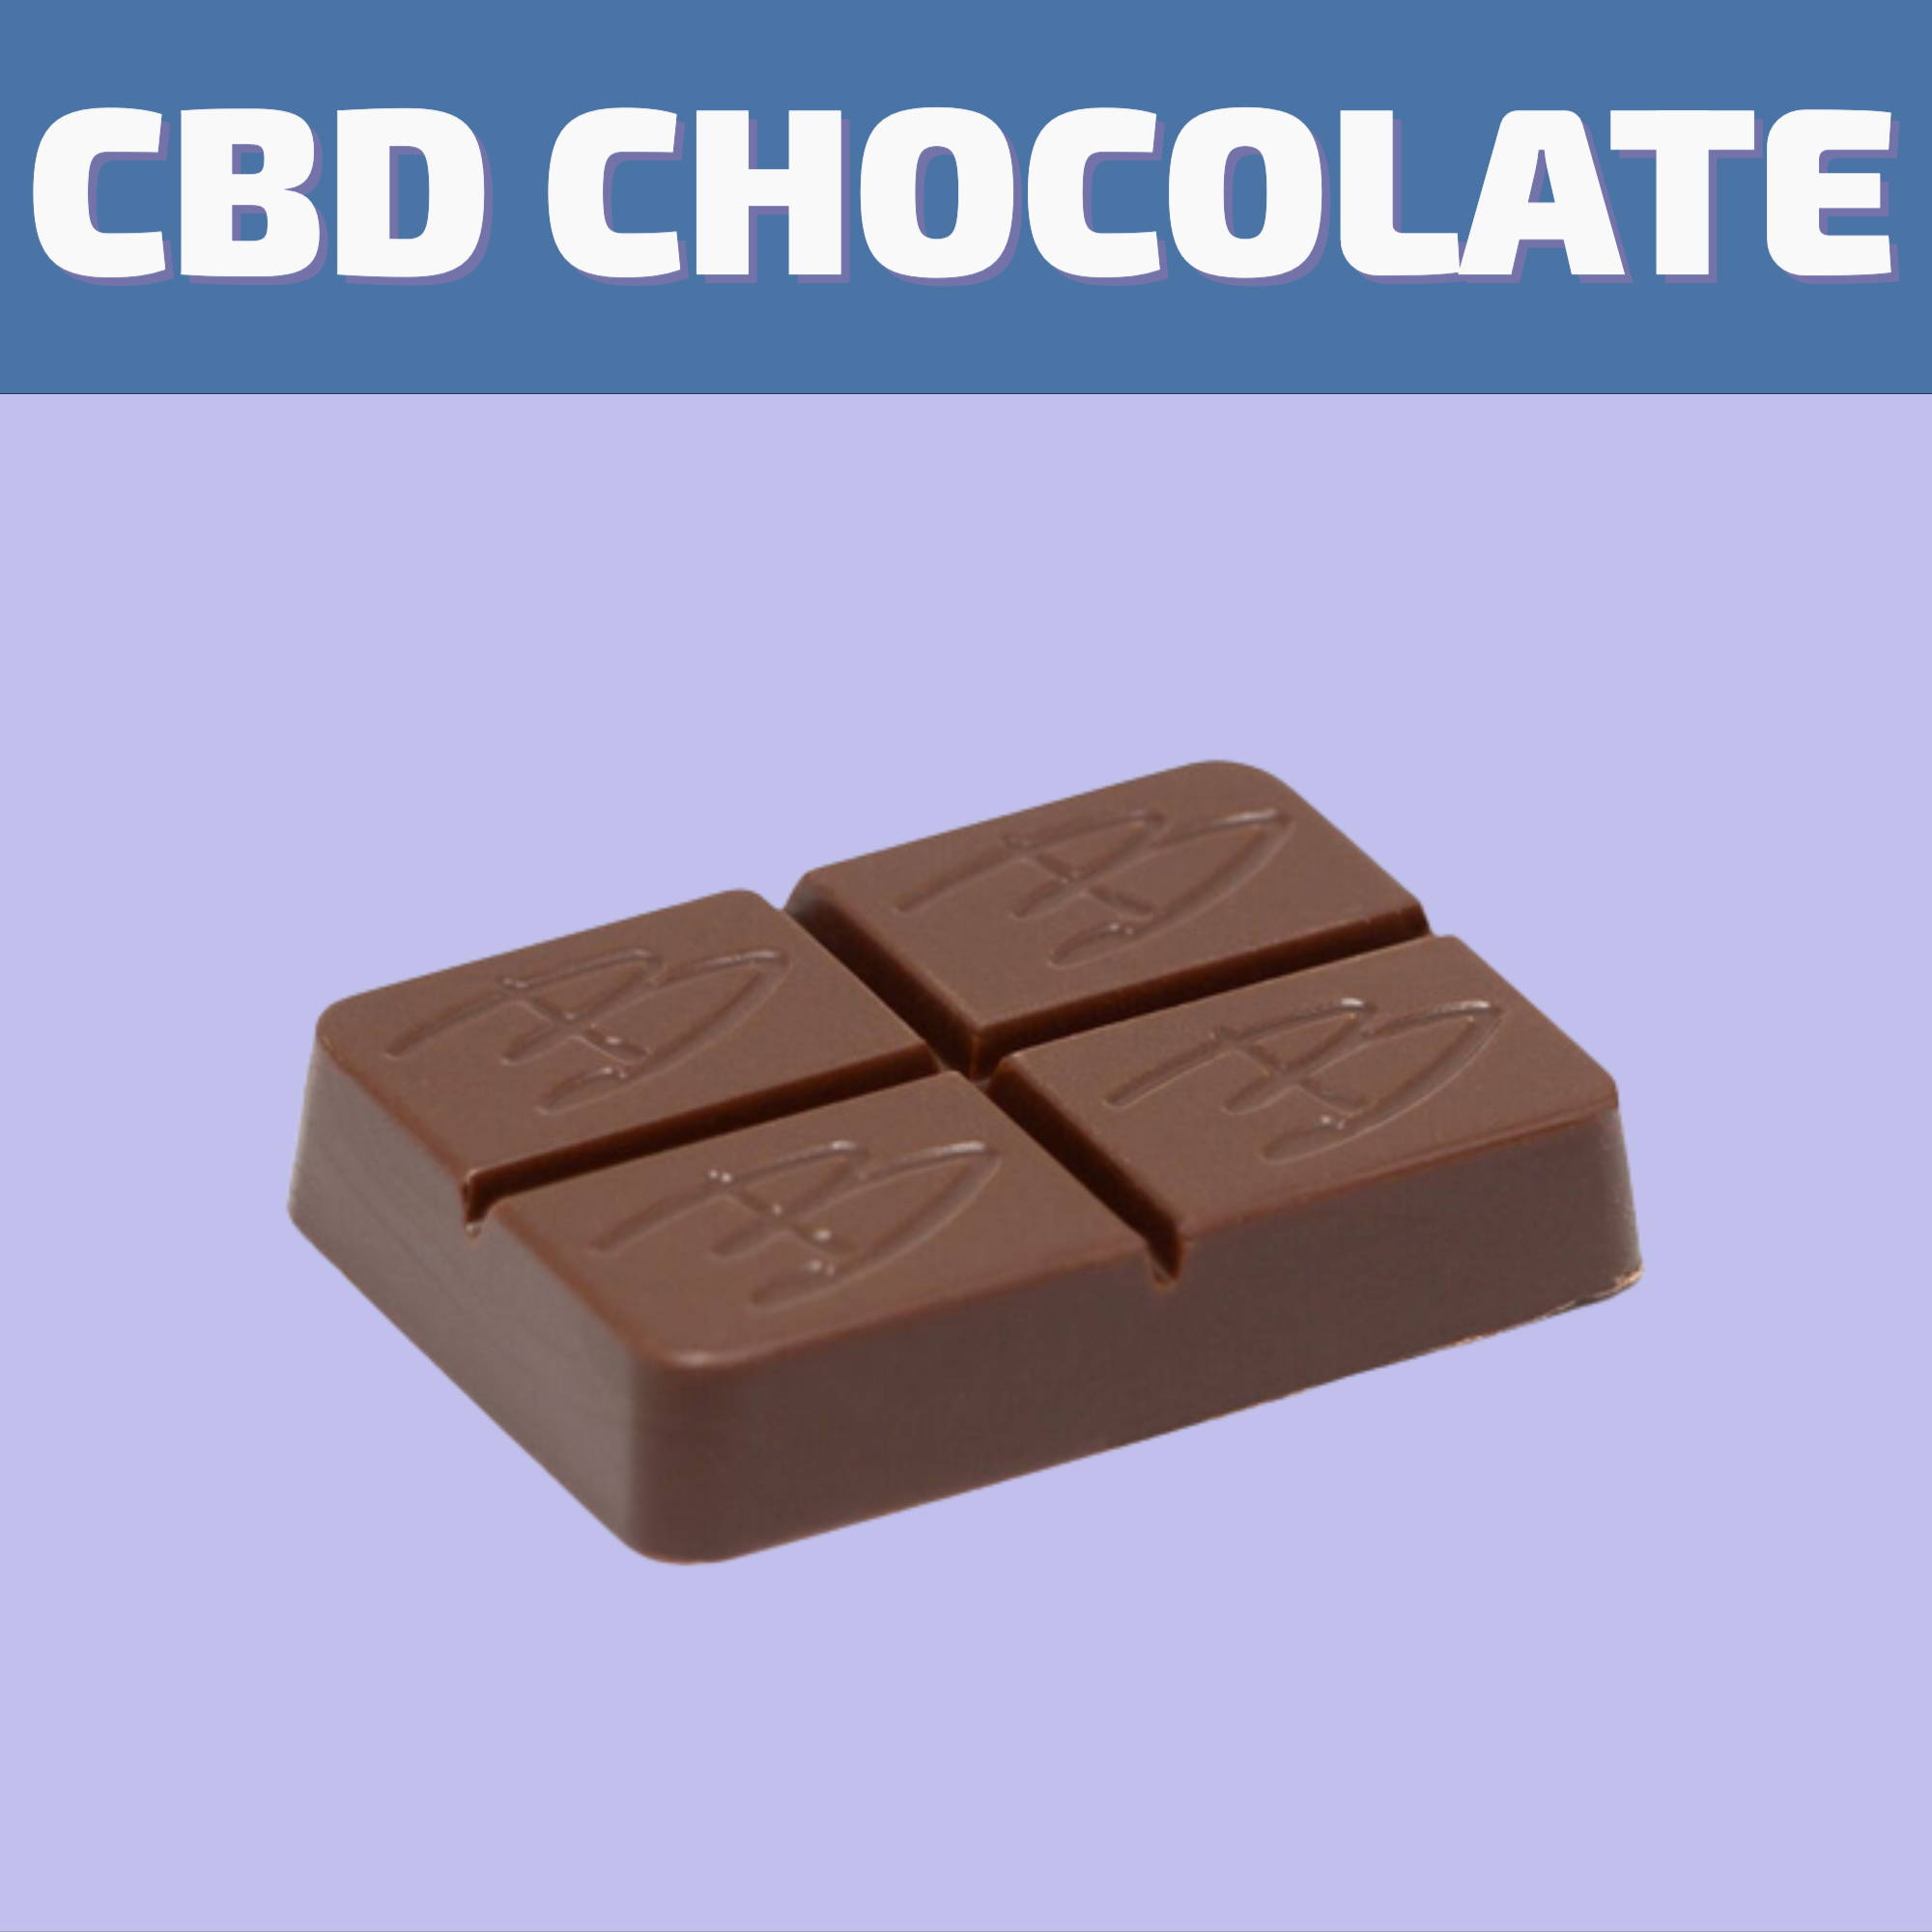 Shop the best selection of CBD Chocolate and CBD Oil for same day delivery or pick it up at our dispensary on 580 Academy Road.  